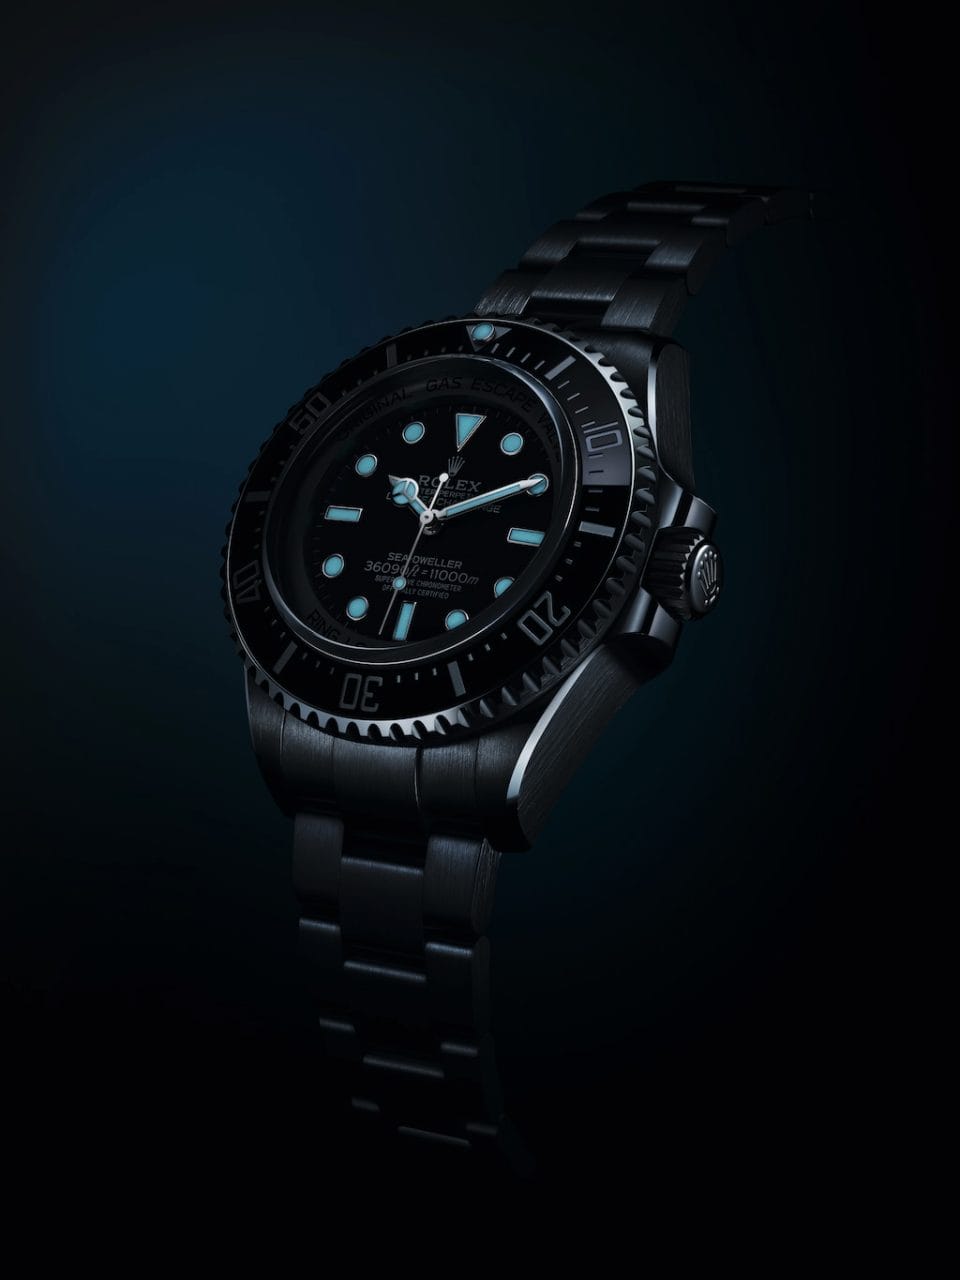 #ObjectsOfDesire: Rolex's Oyster Perpetual Deepsea Challenge Is Designed To Defy Limits